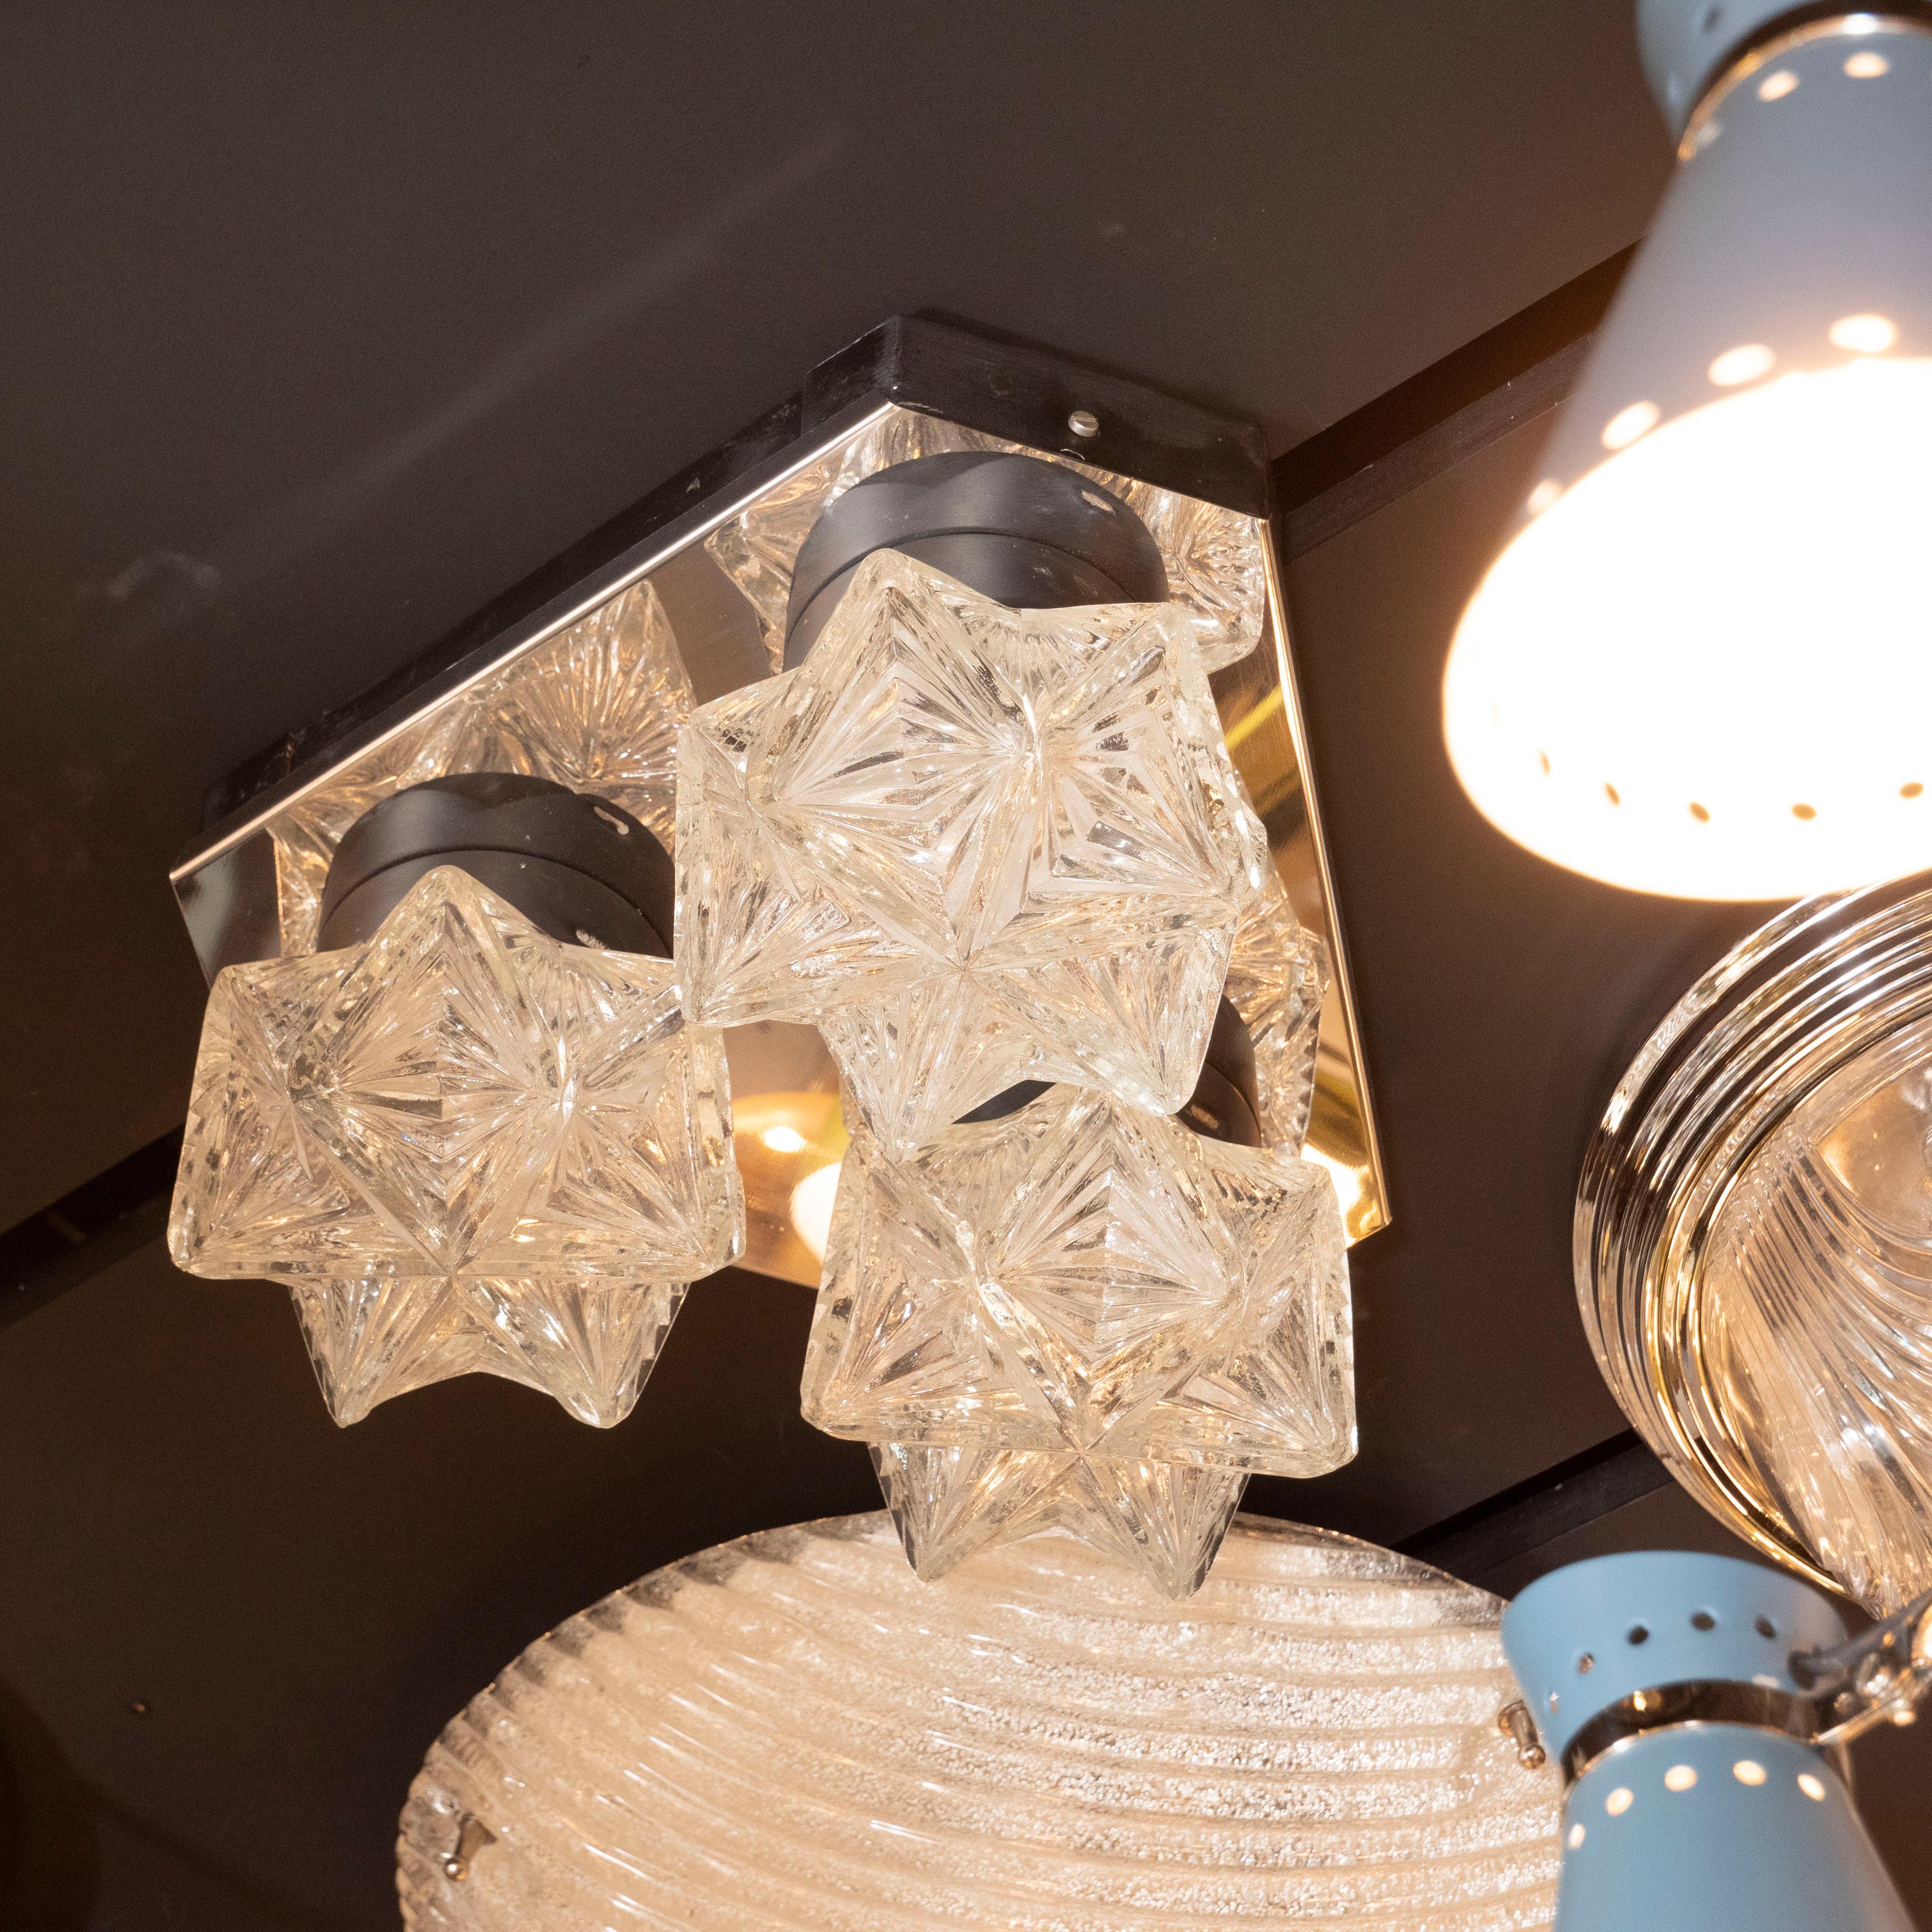 This sculptural flush mount was realized in Germany, circa 1950. It features three hand blown hexagonal translucent faceted glass shades offering an abundance of geometric angular forms in relief. The shades attach to a hexagonal base in polished